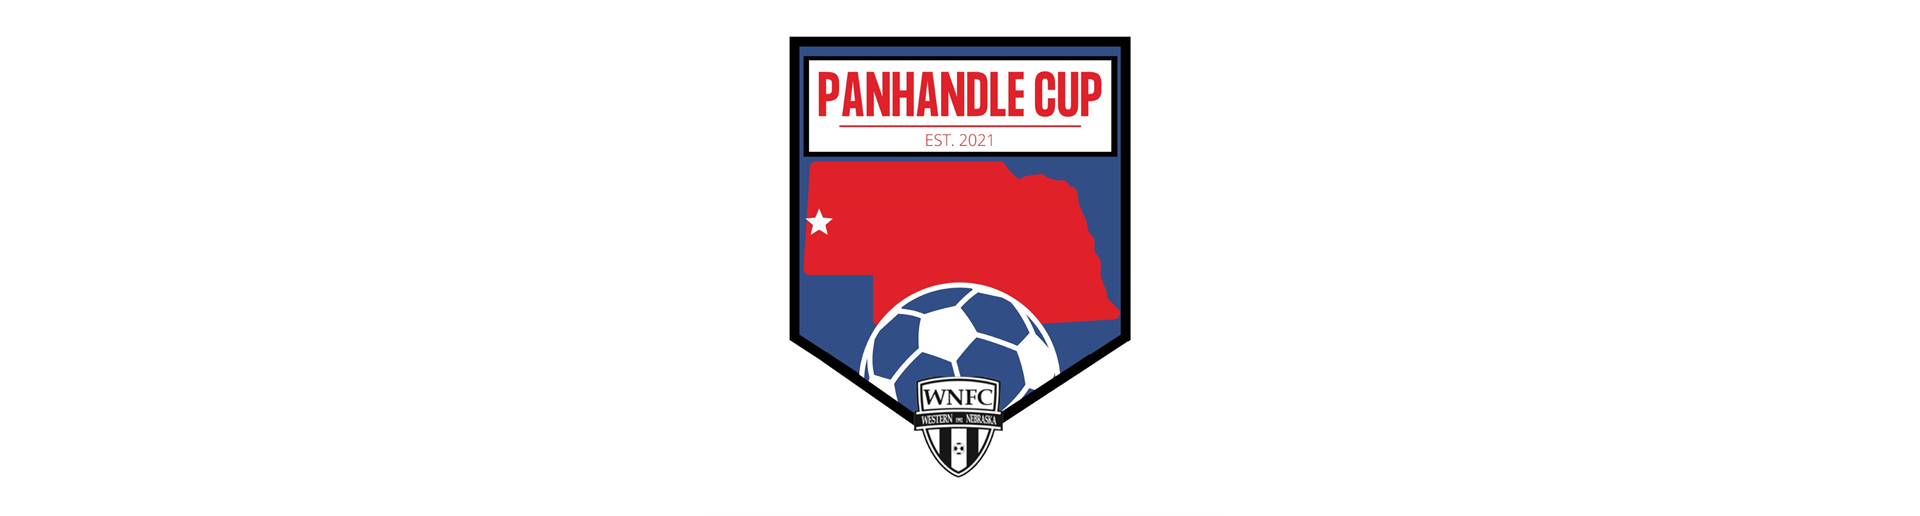 The Panhandle Cup